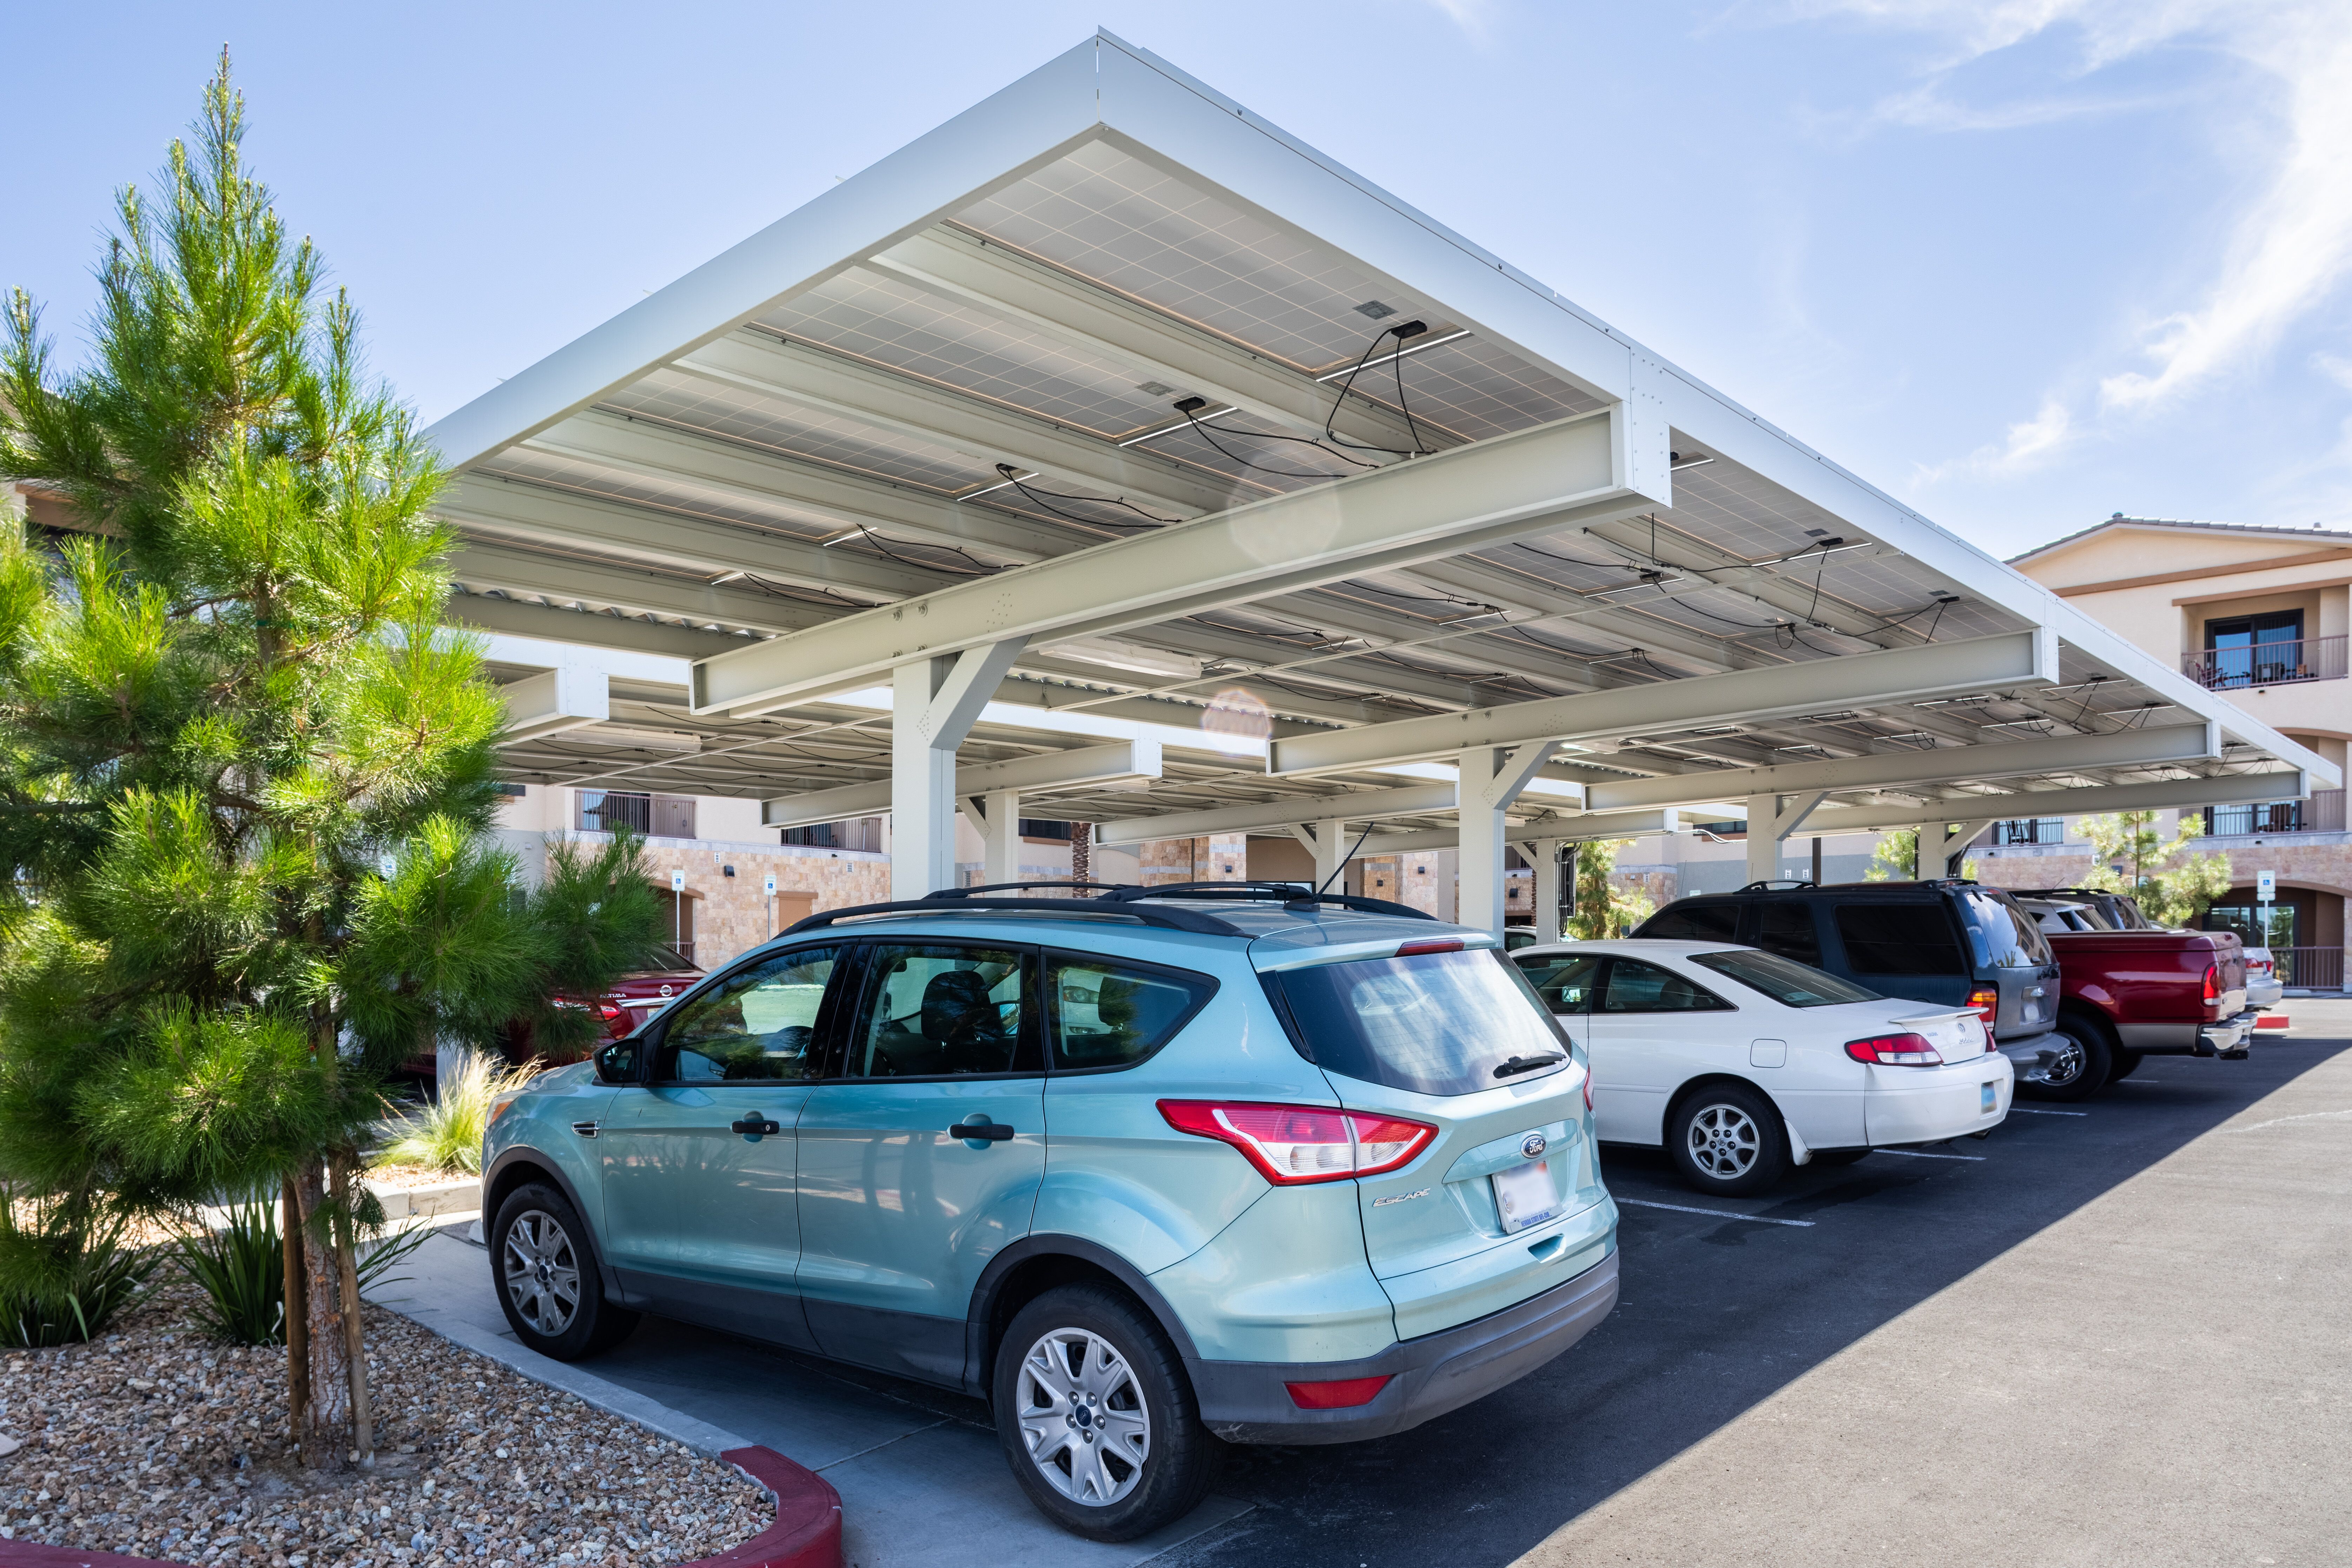 Solar Canopy Carport Covering Parked Cars